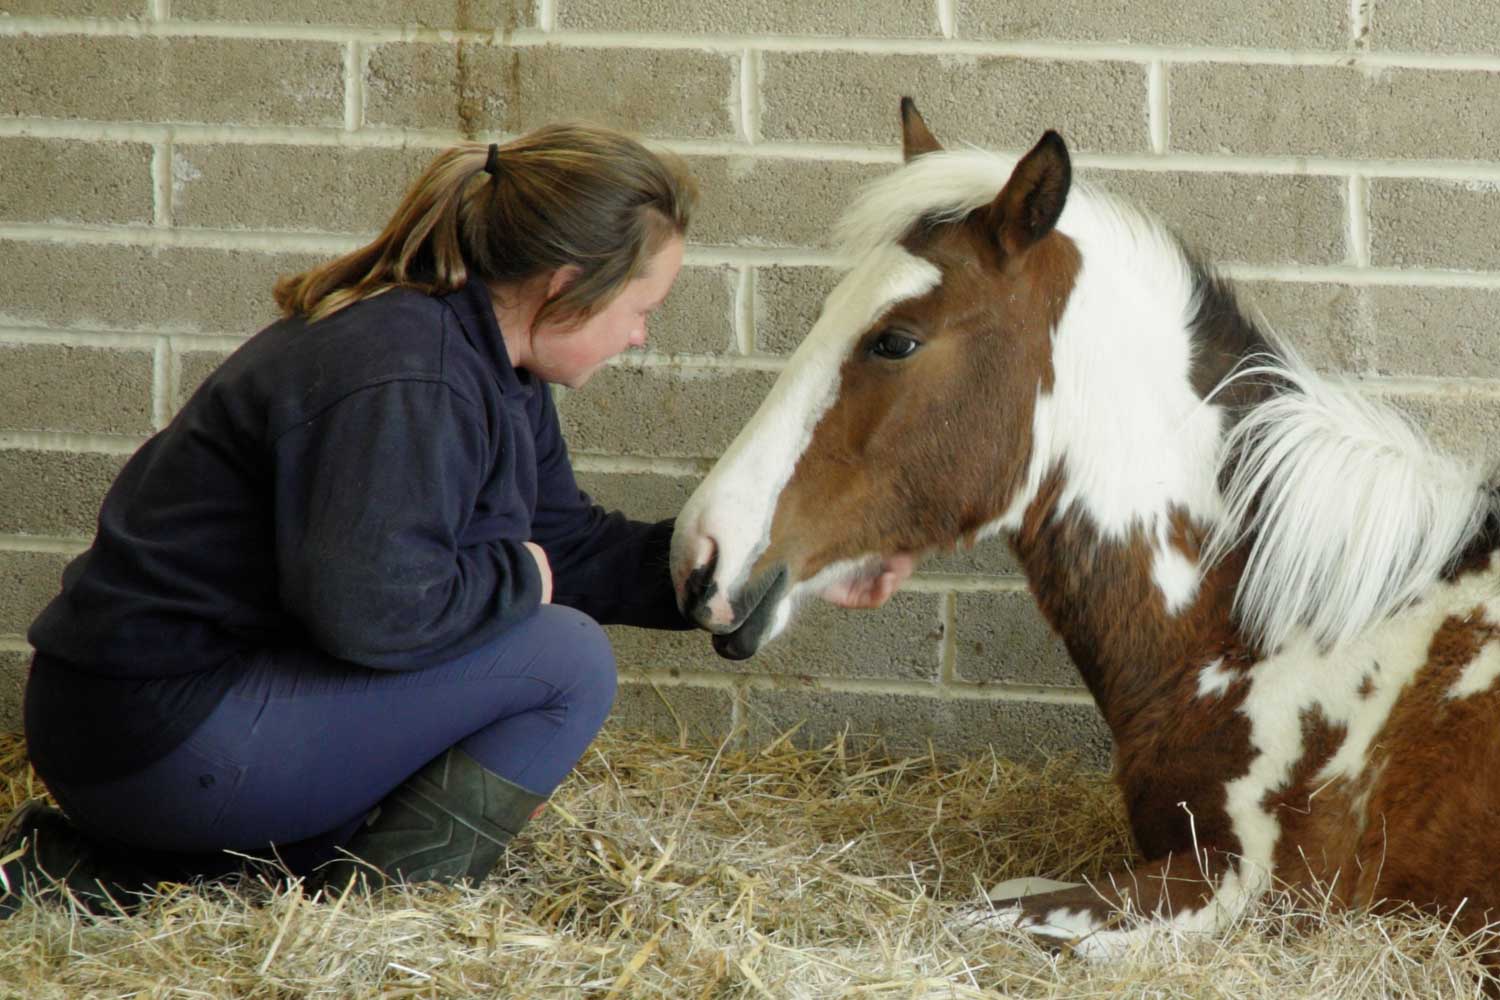 Foal abuser sentenced after shocking cruelty case